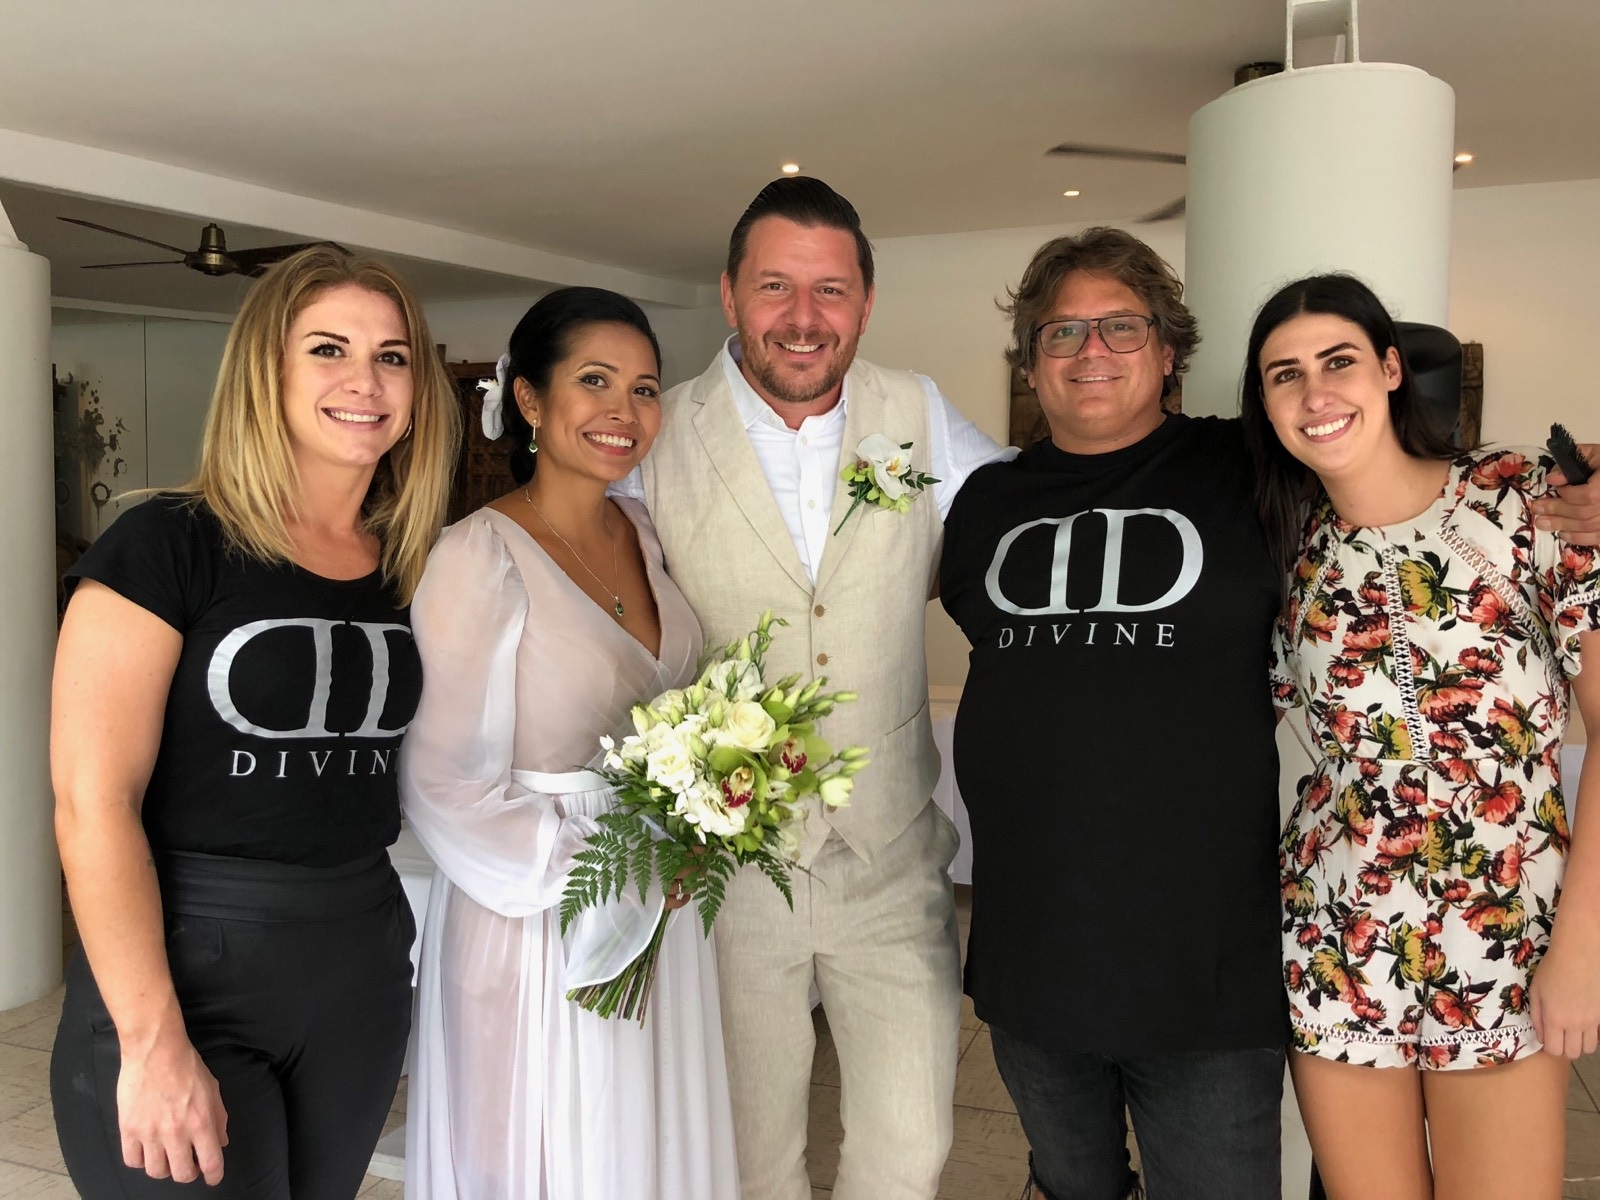 Divine at Manu and Clarissa's wedding from My Kitchen Rules at Mission Beach